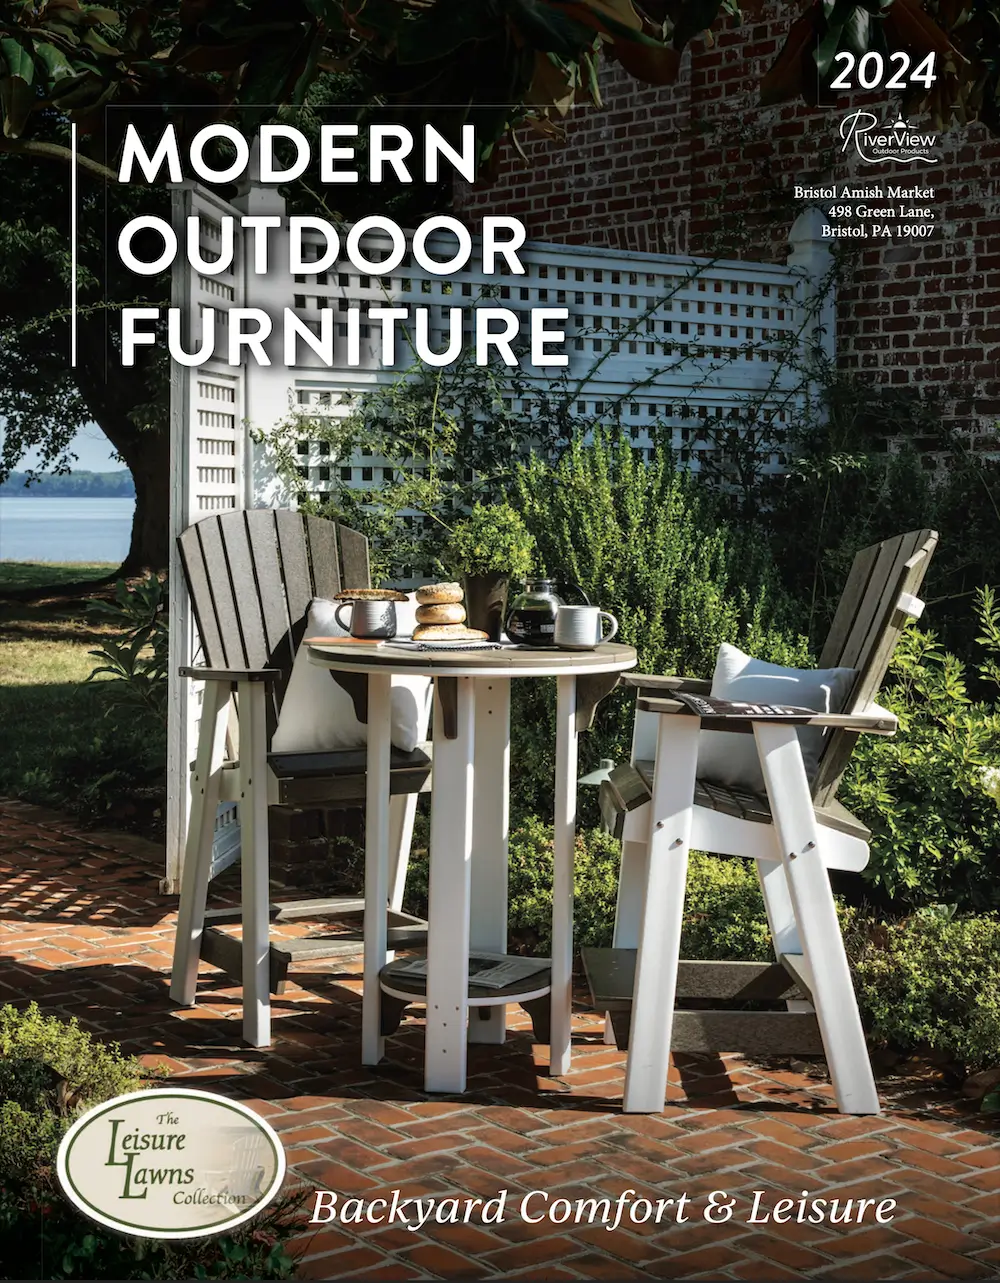 The Leisure Lawns Outdoor Furniture Collection